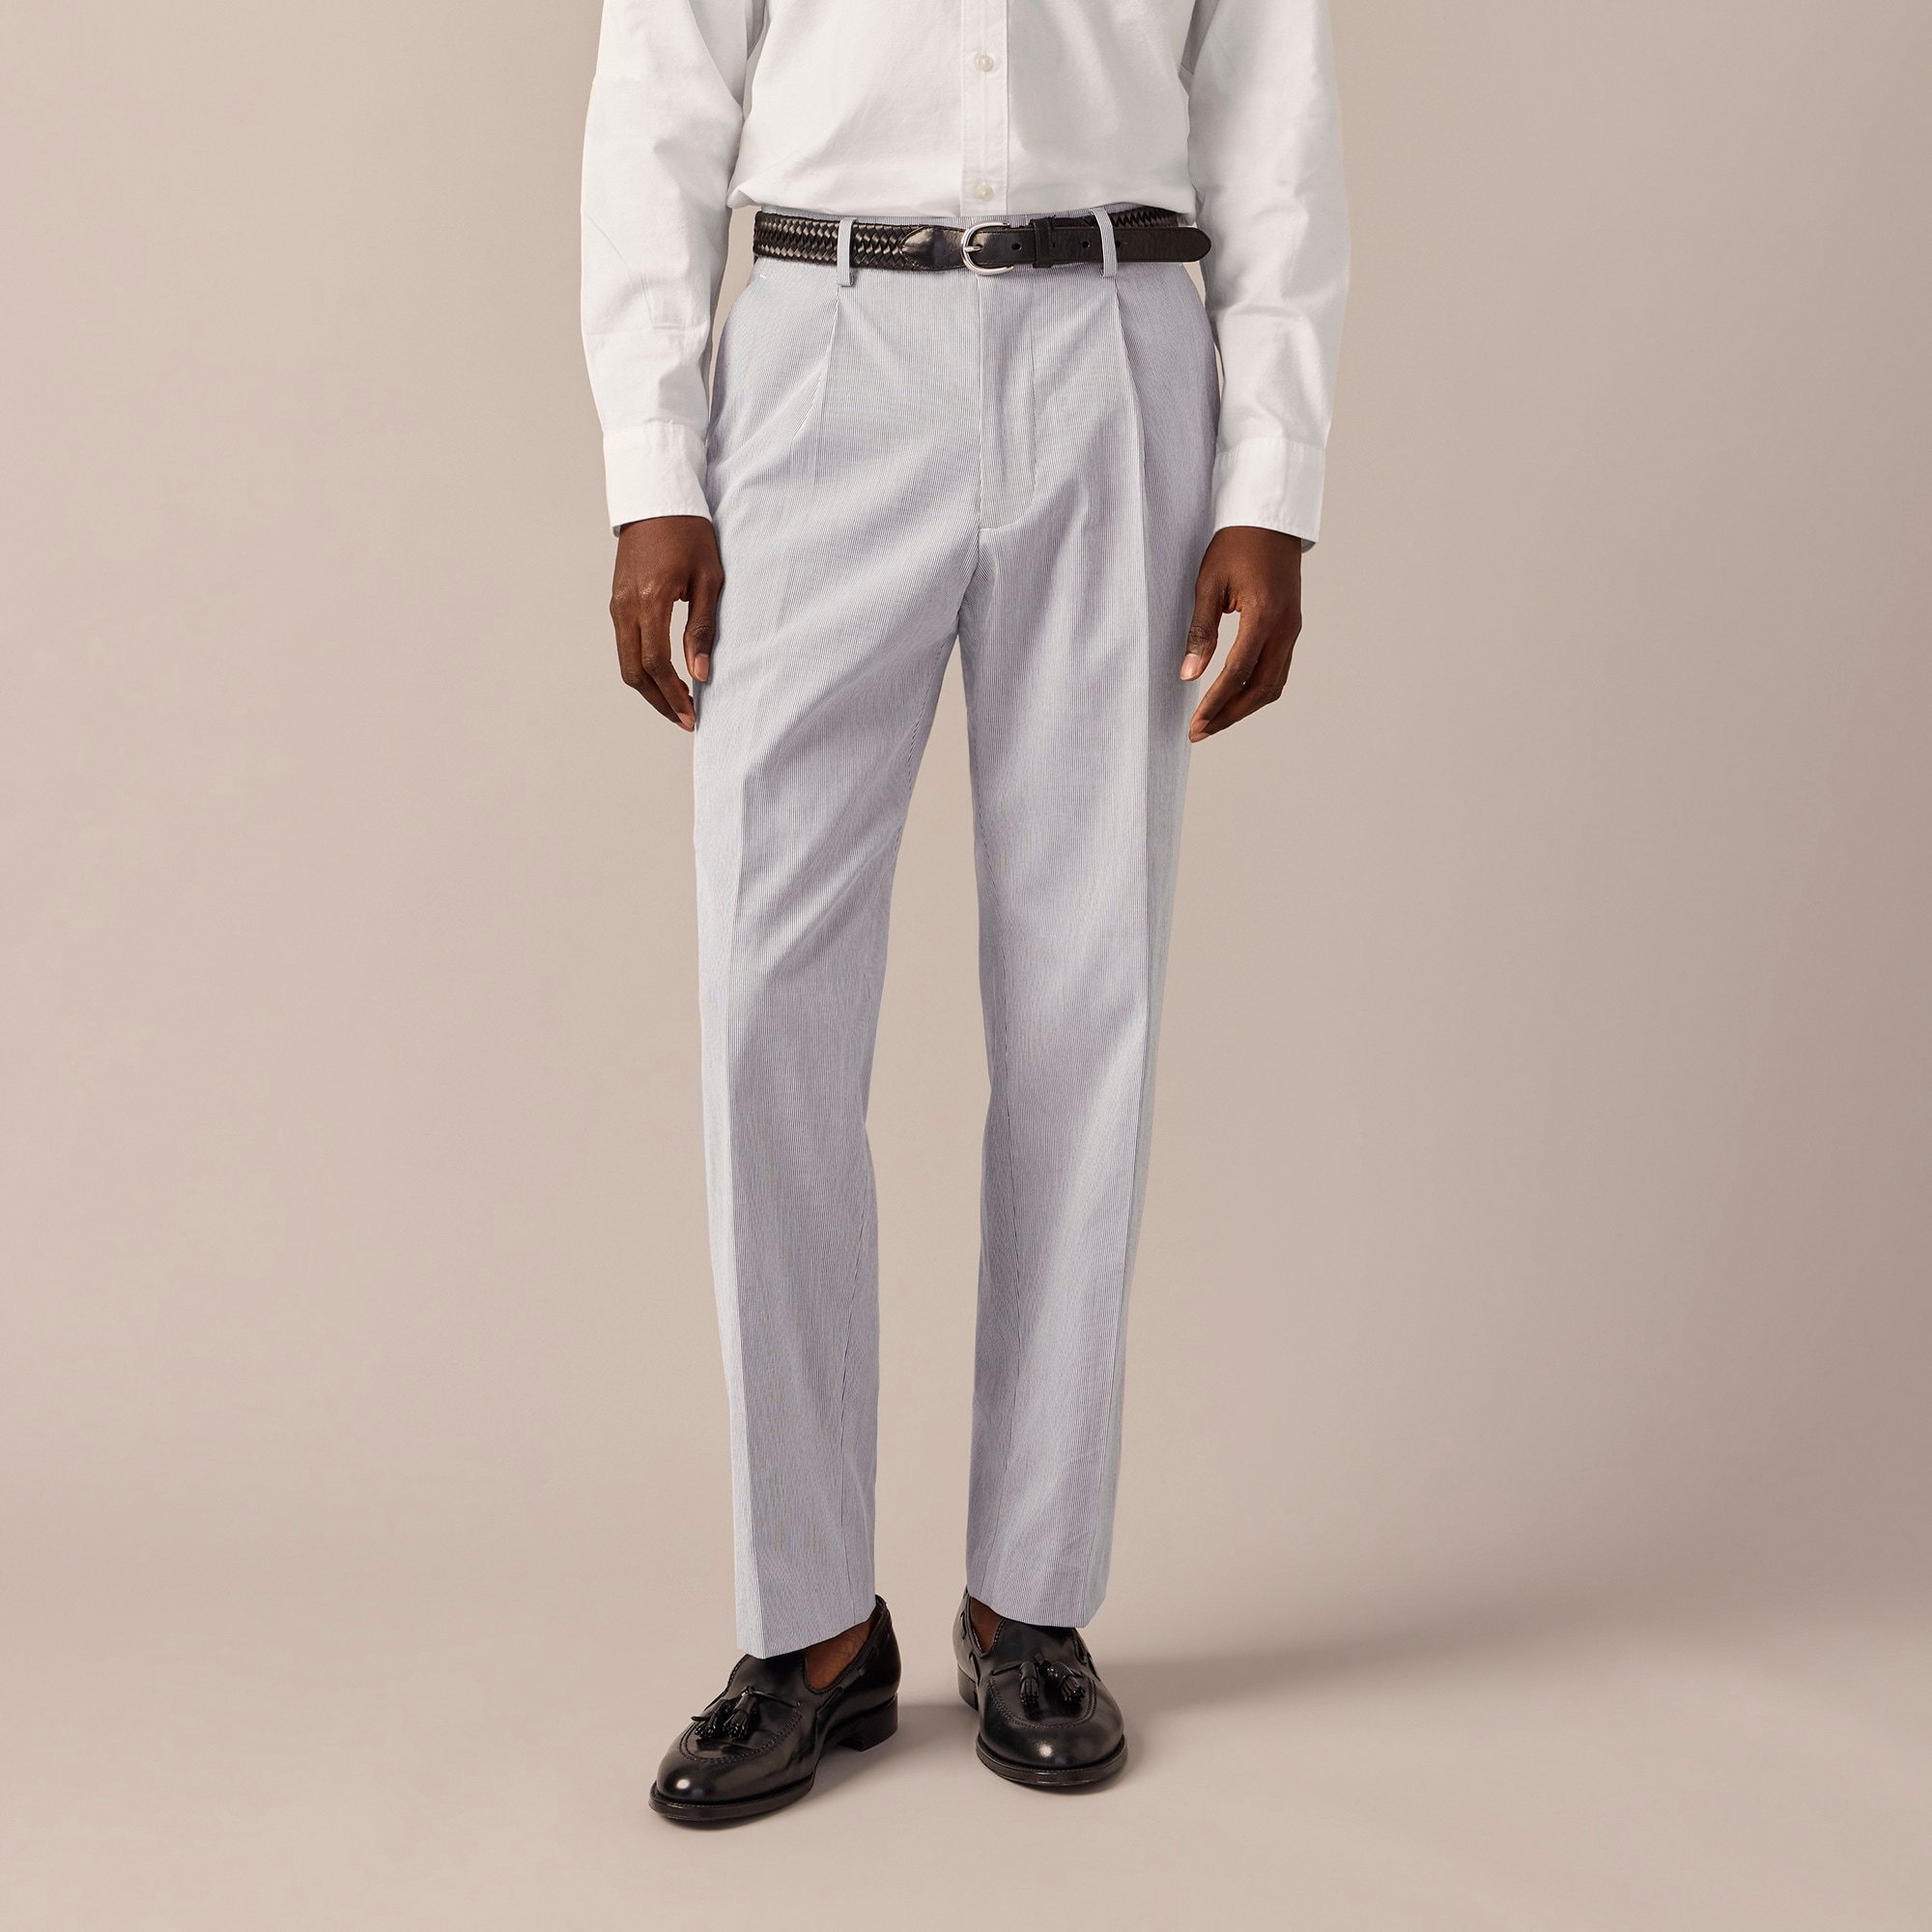 Jcrew Kenmare Relaxed-fit suit pant in Italian cotton pincord